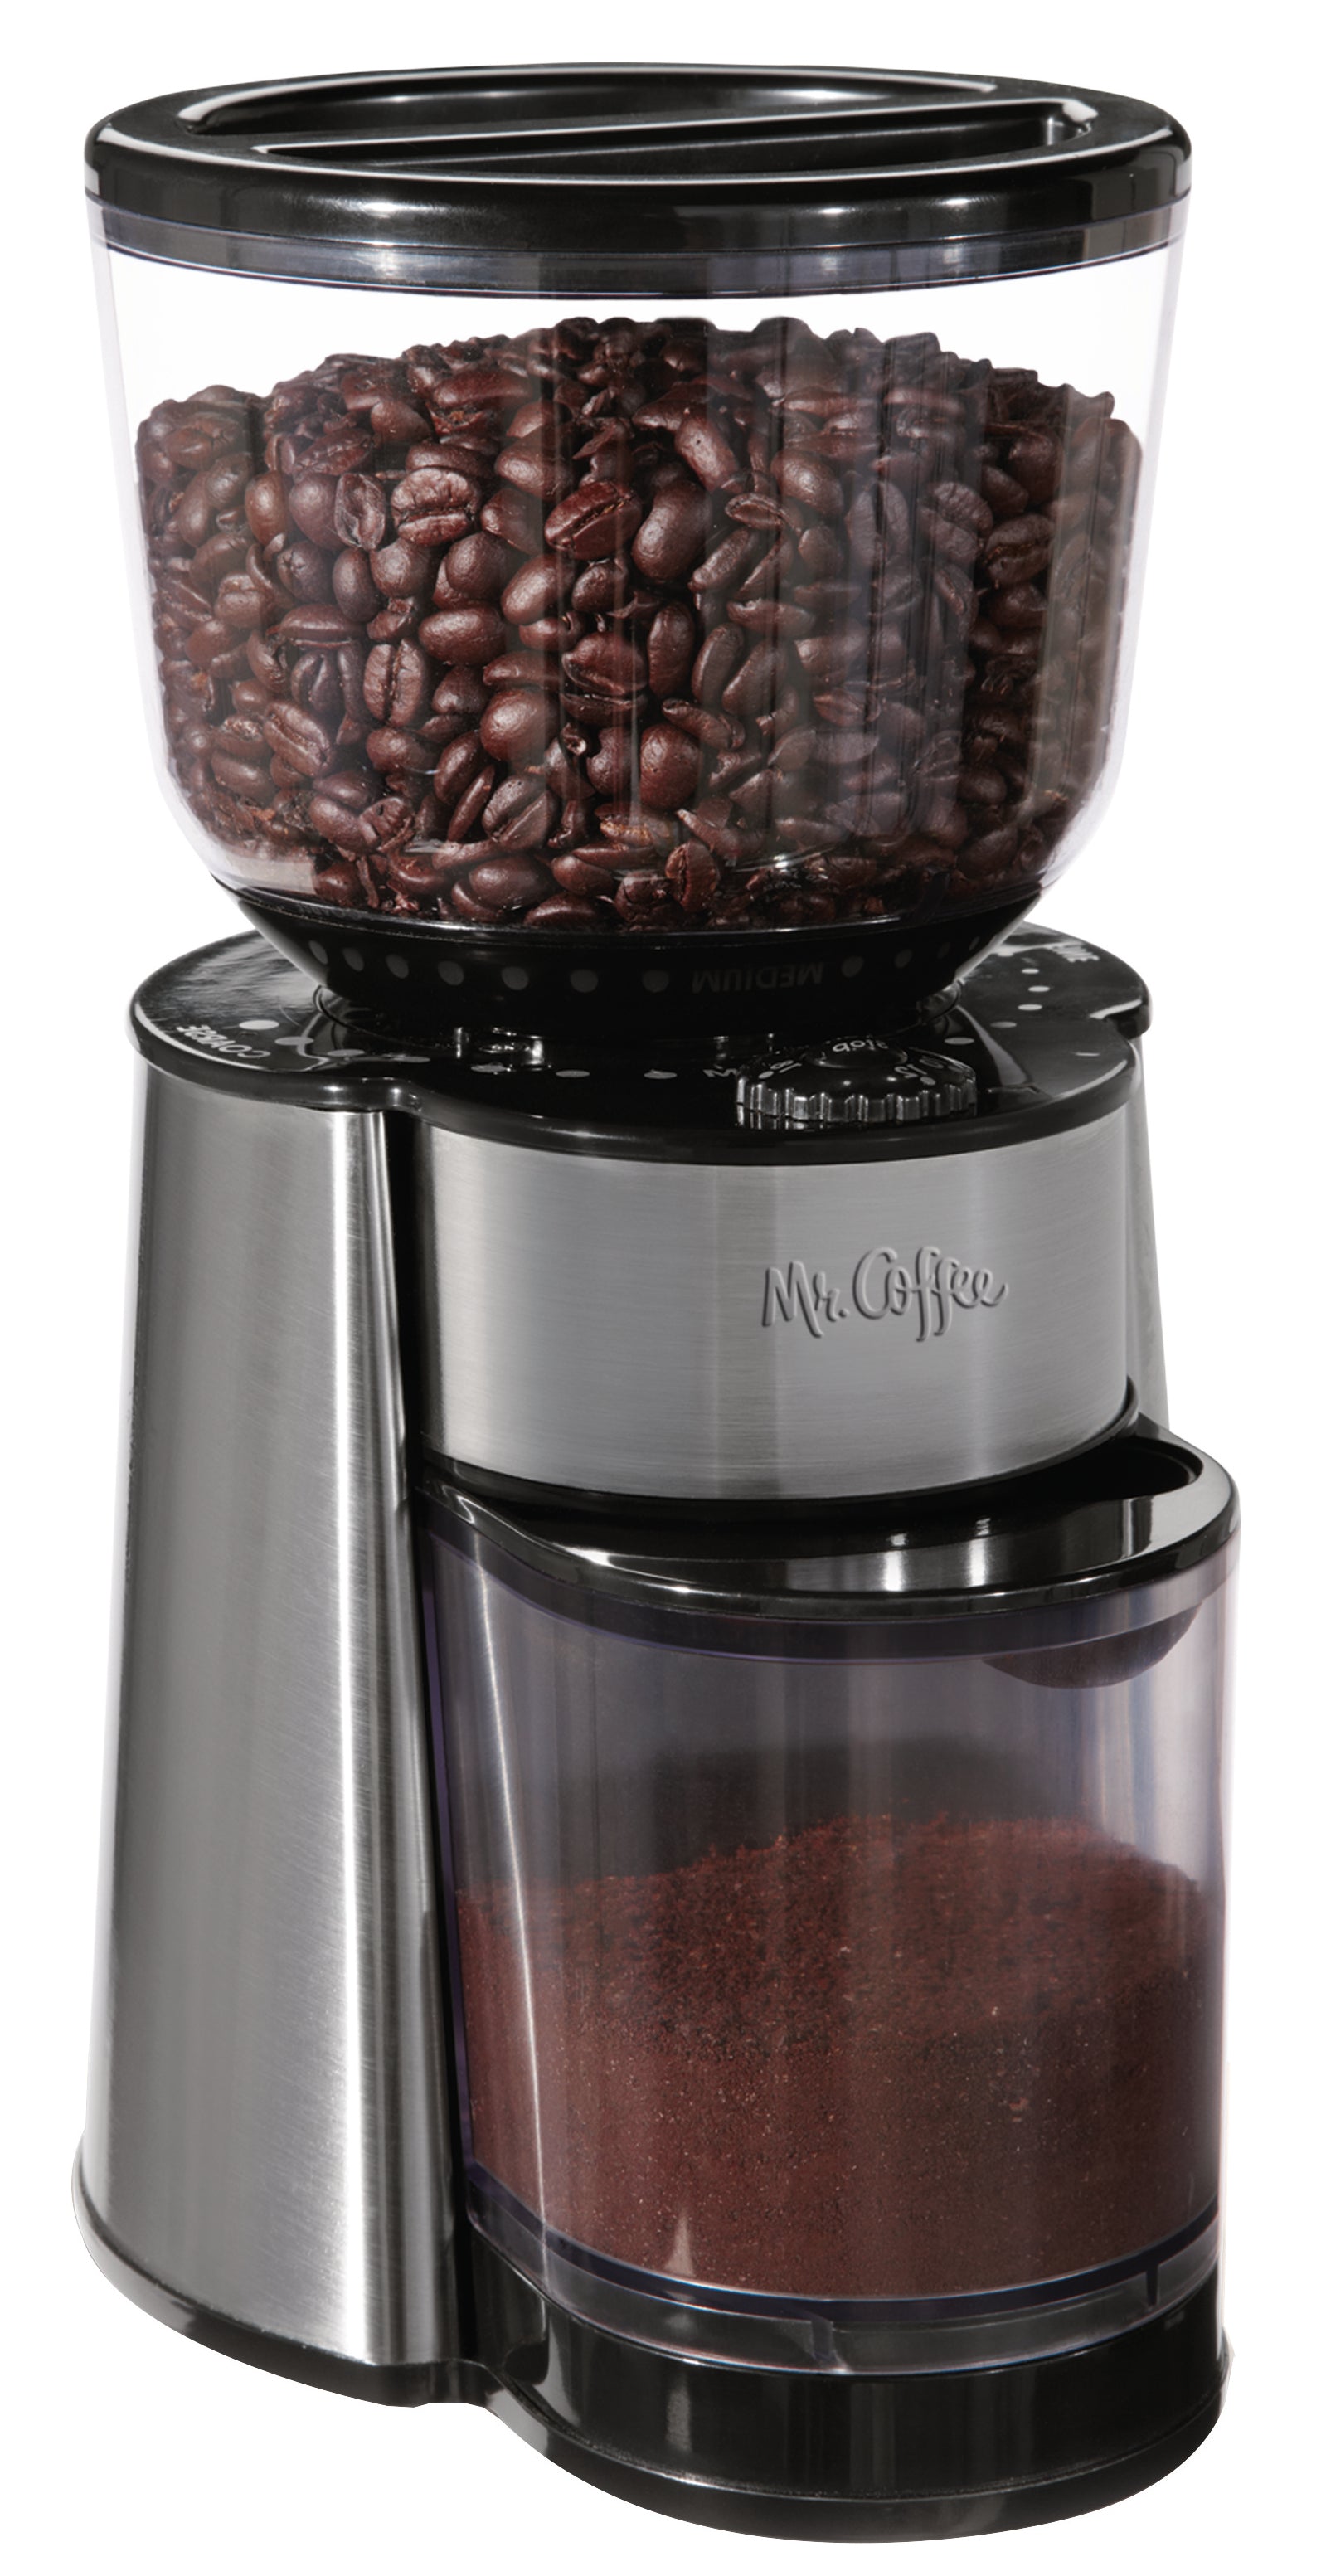  Mr. Coffee Burr Coffee Grinder, Automatic Grinder with